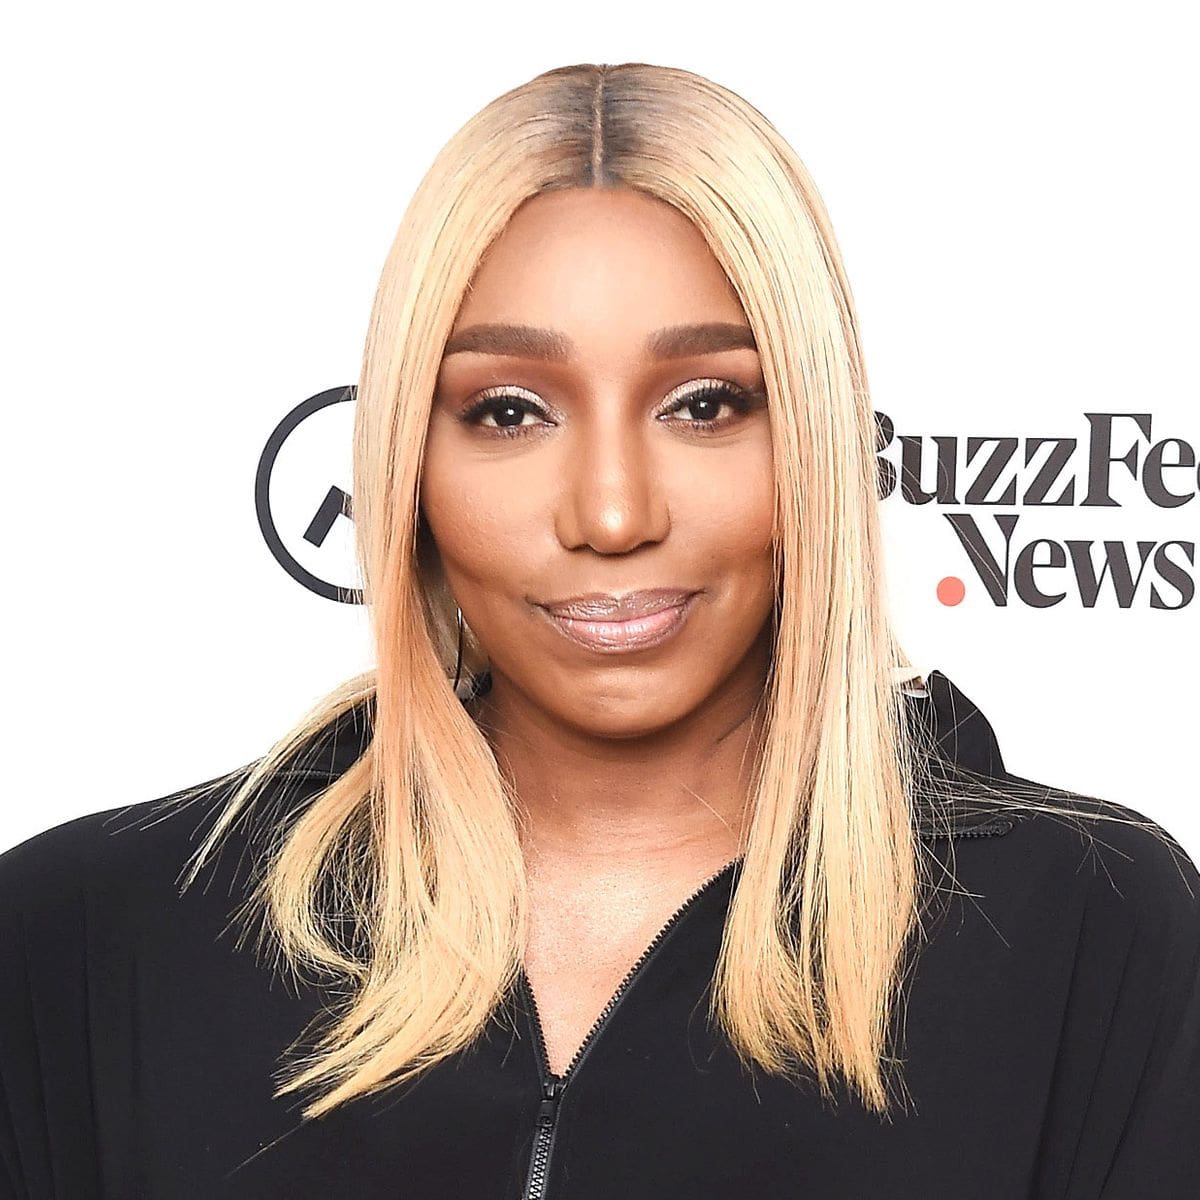 nene-leakes-is-heartbroken-she-praises-her-aunt-following-her-passing-check-out-her-emotional-message